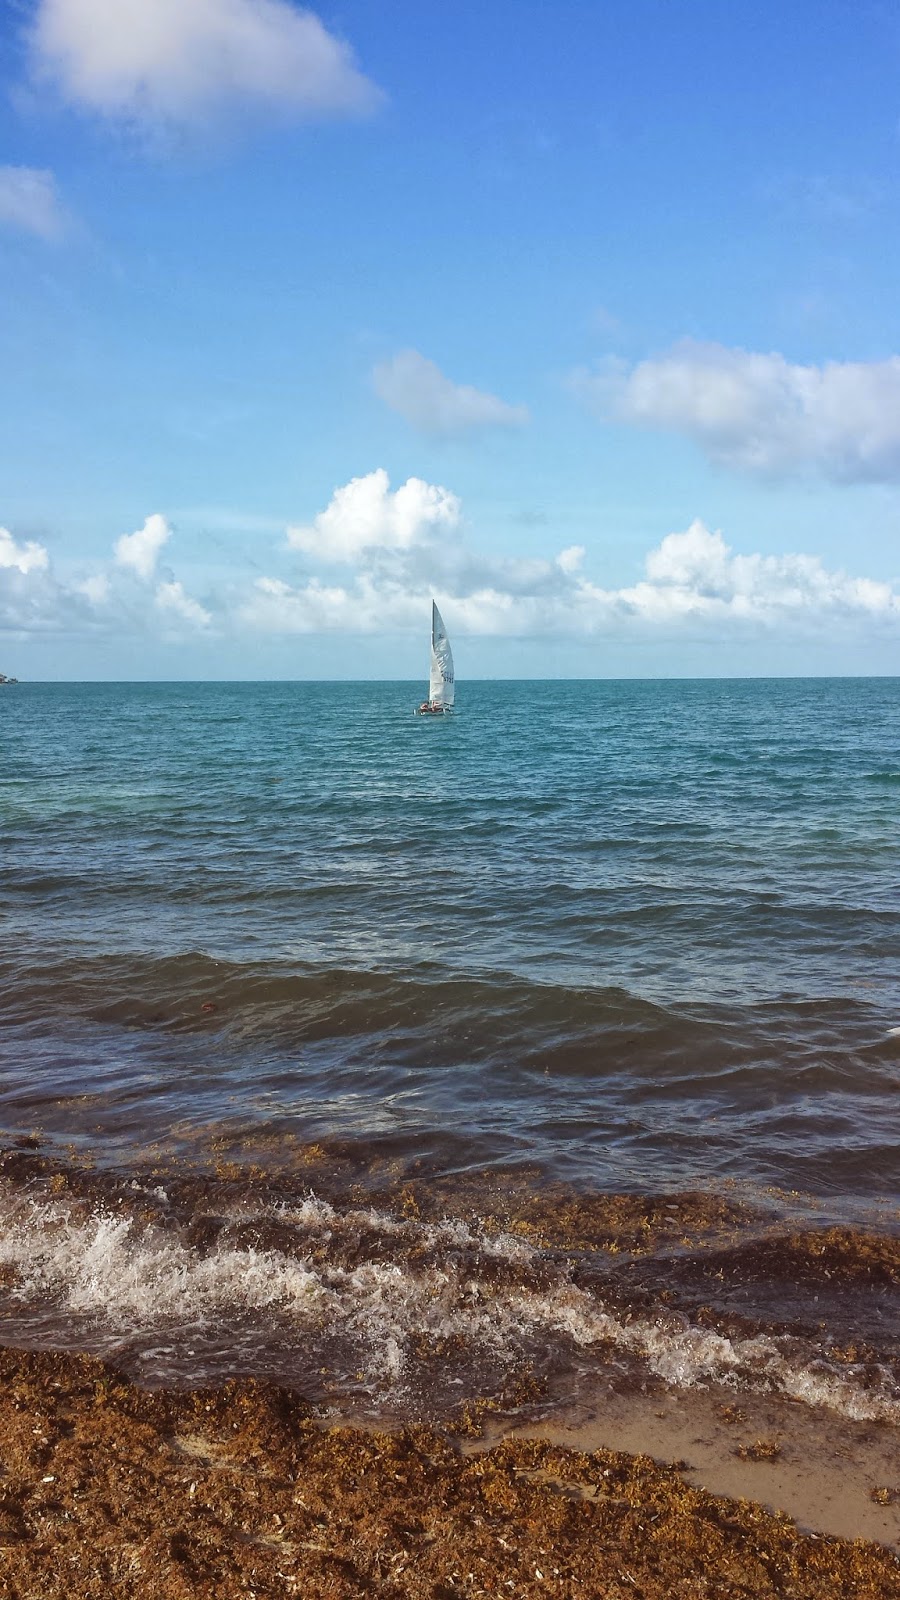 Remaxvipbelize: Picture admiring this sailboat